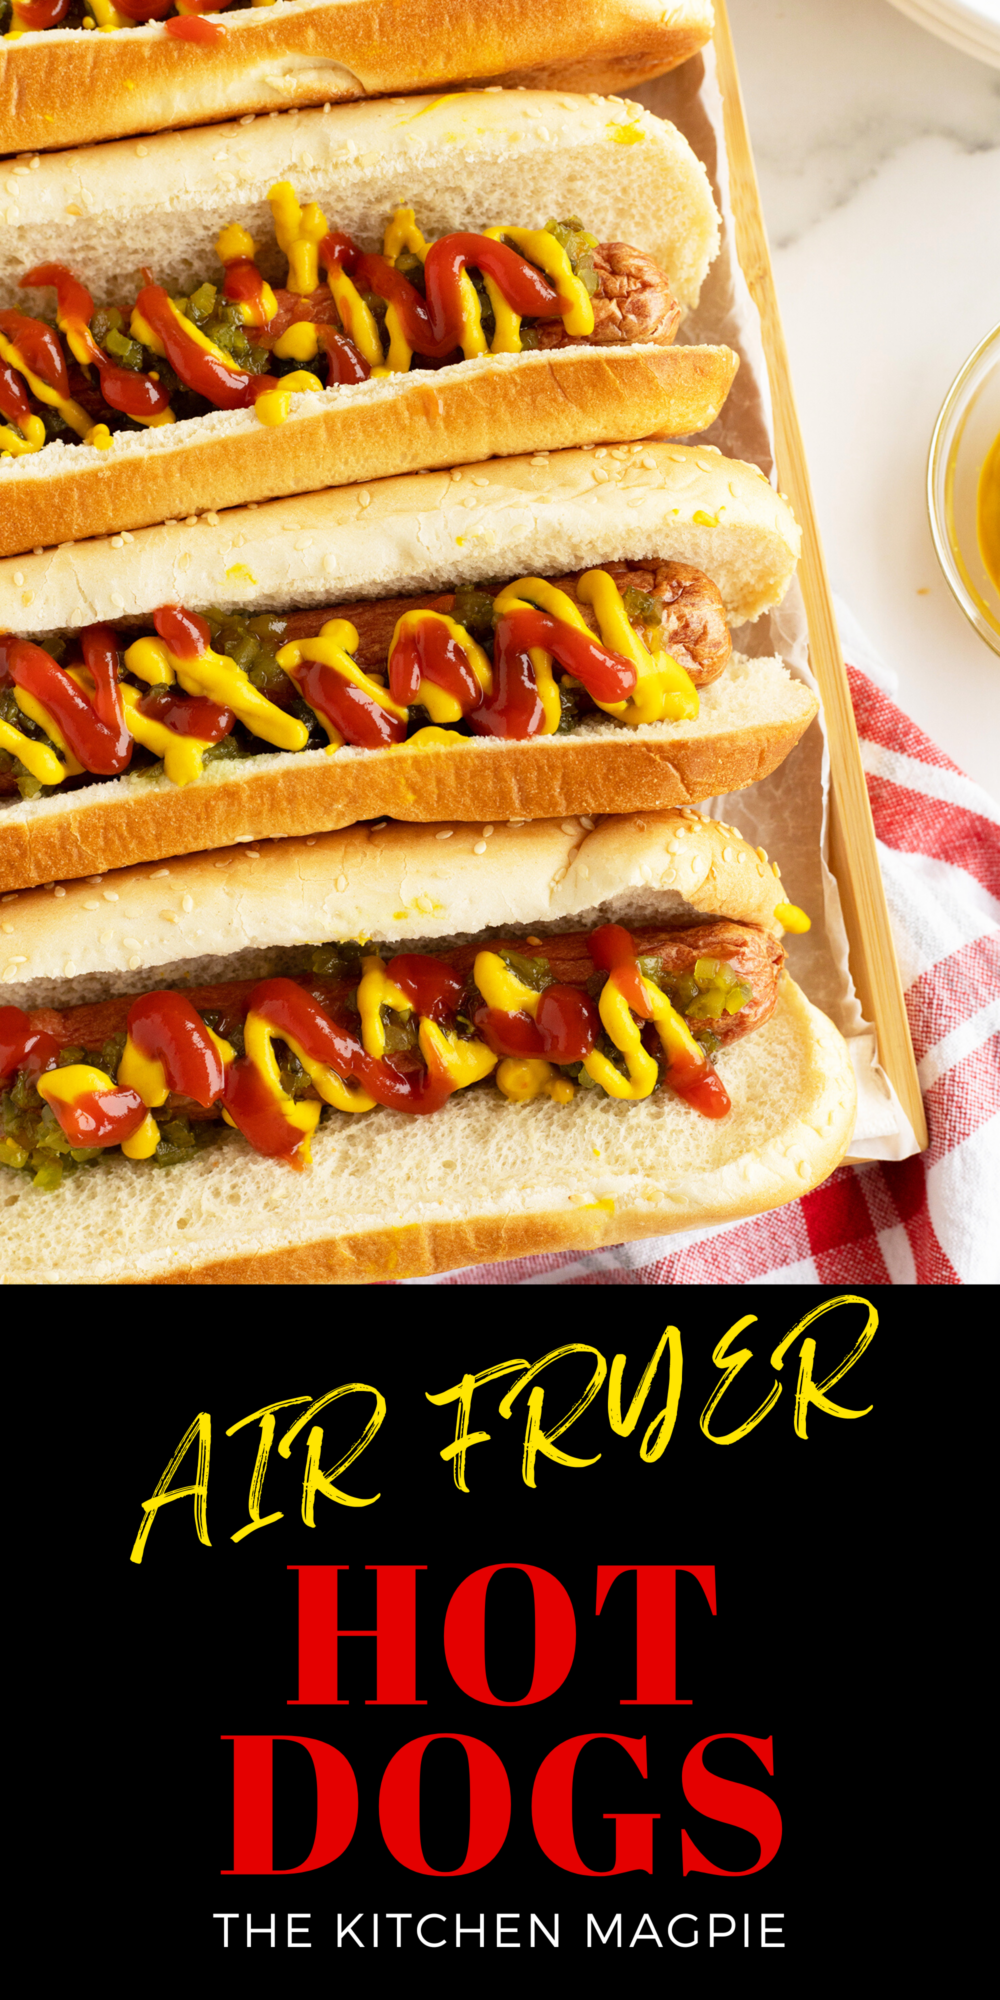 Using an air fryer to whip up some hot dogs is easy and a great time saver during busy weeknights